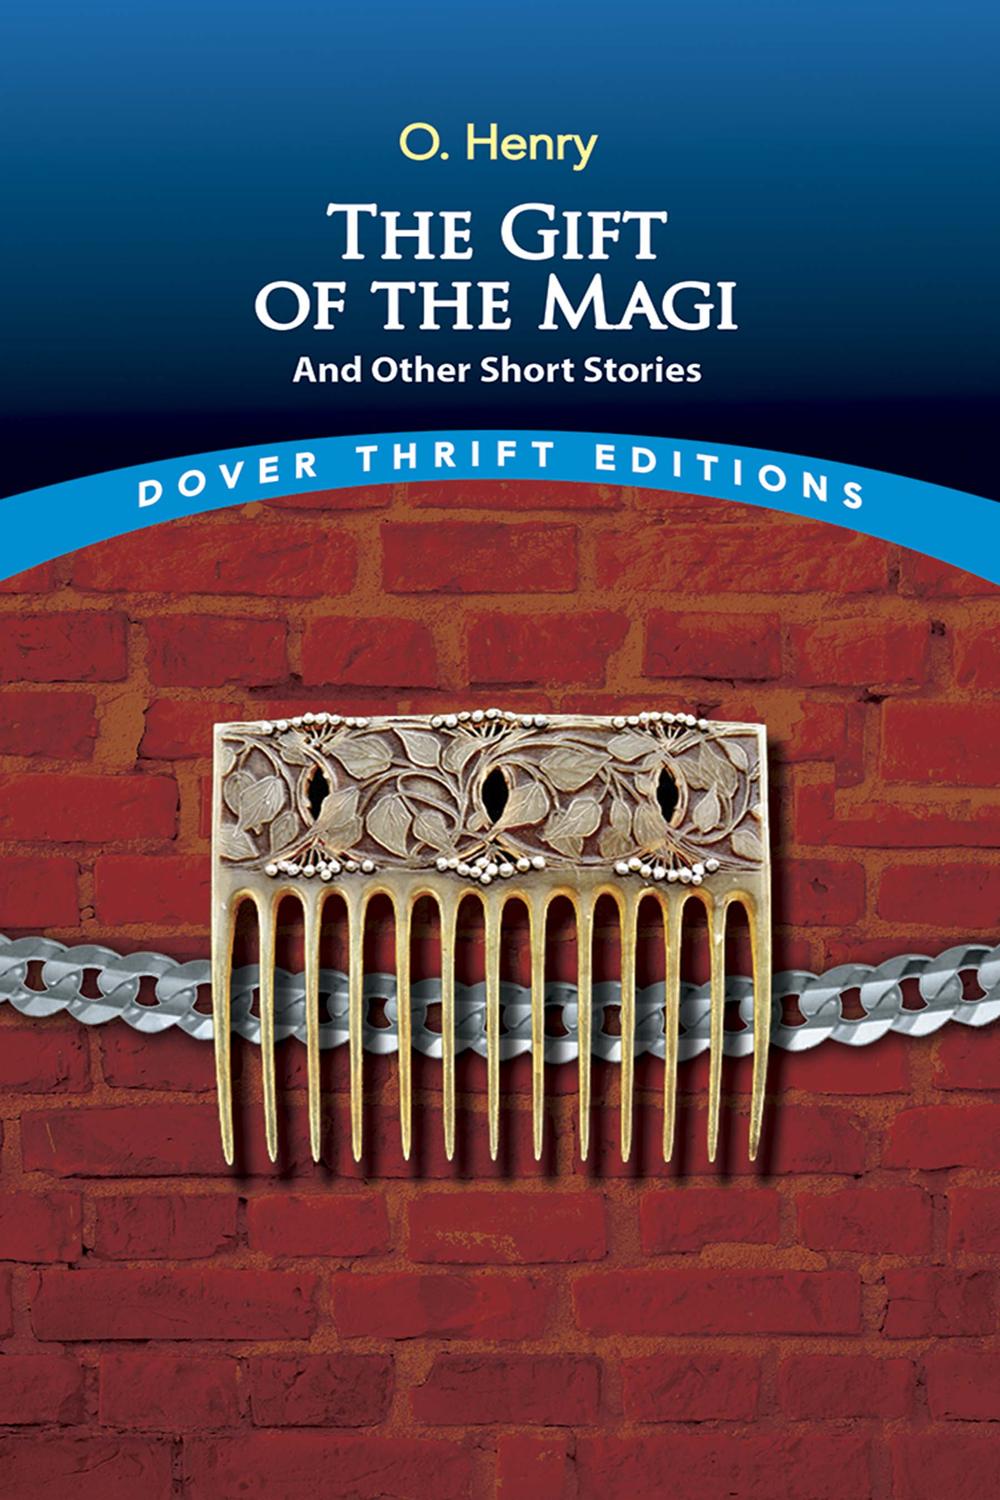 The Gift of the Magi and Other Short Stories - O. Henry,,